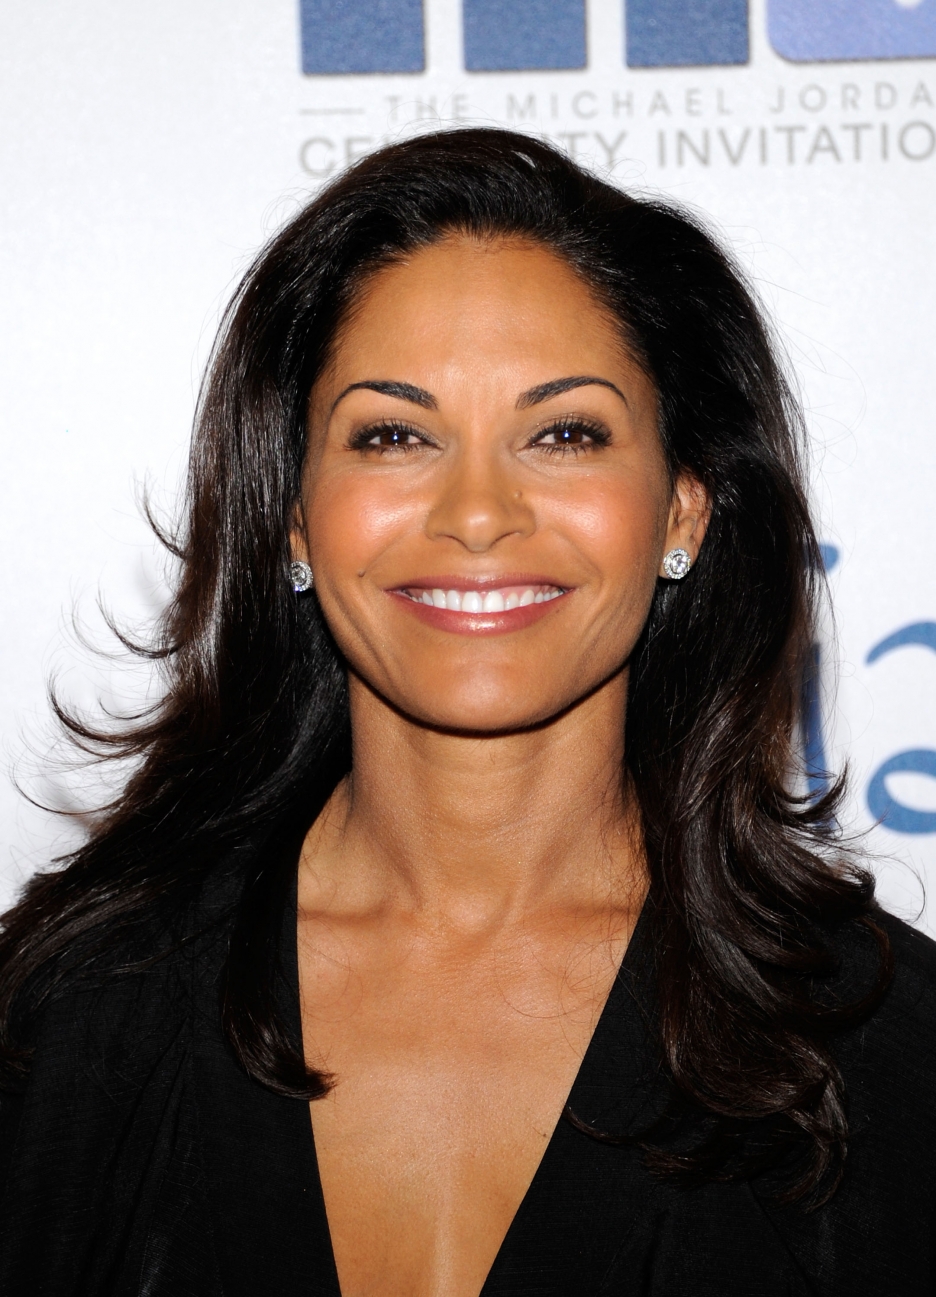 The 56-year old daughter of father (?) and mother(?) Salli Richardson in 2024 photo. Salli Richardson earned a 0,235 million dollar salary - leaving the net worth at 2 million in 2024